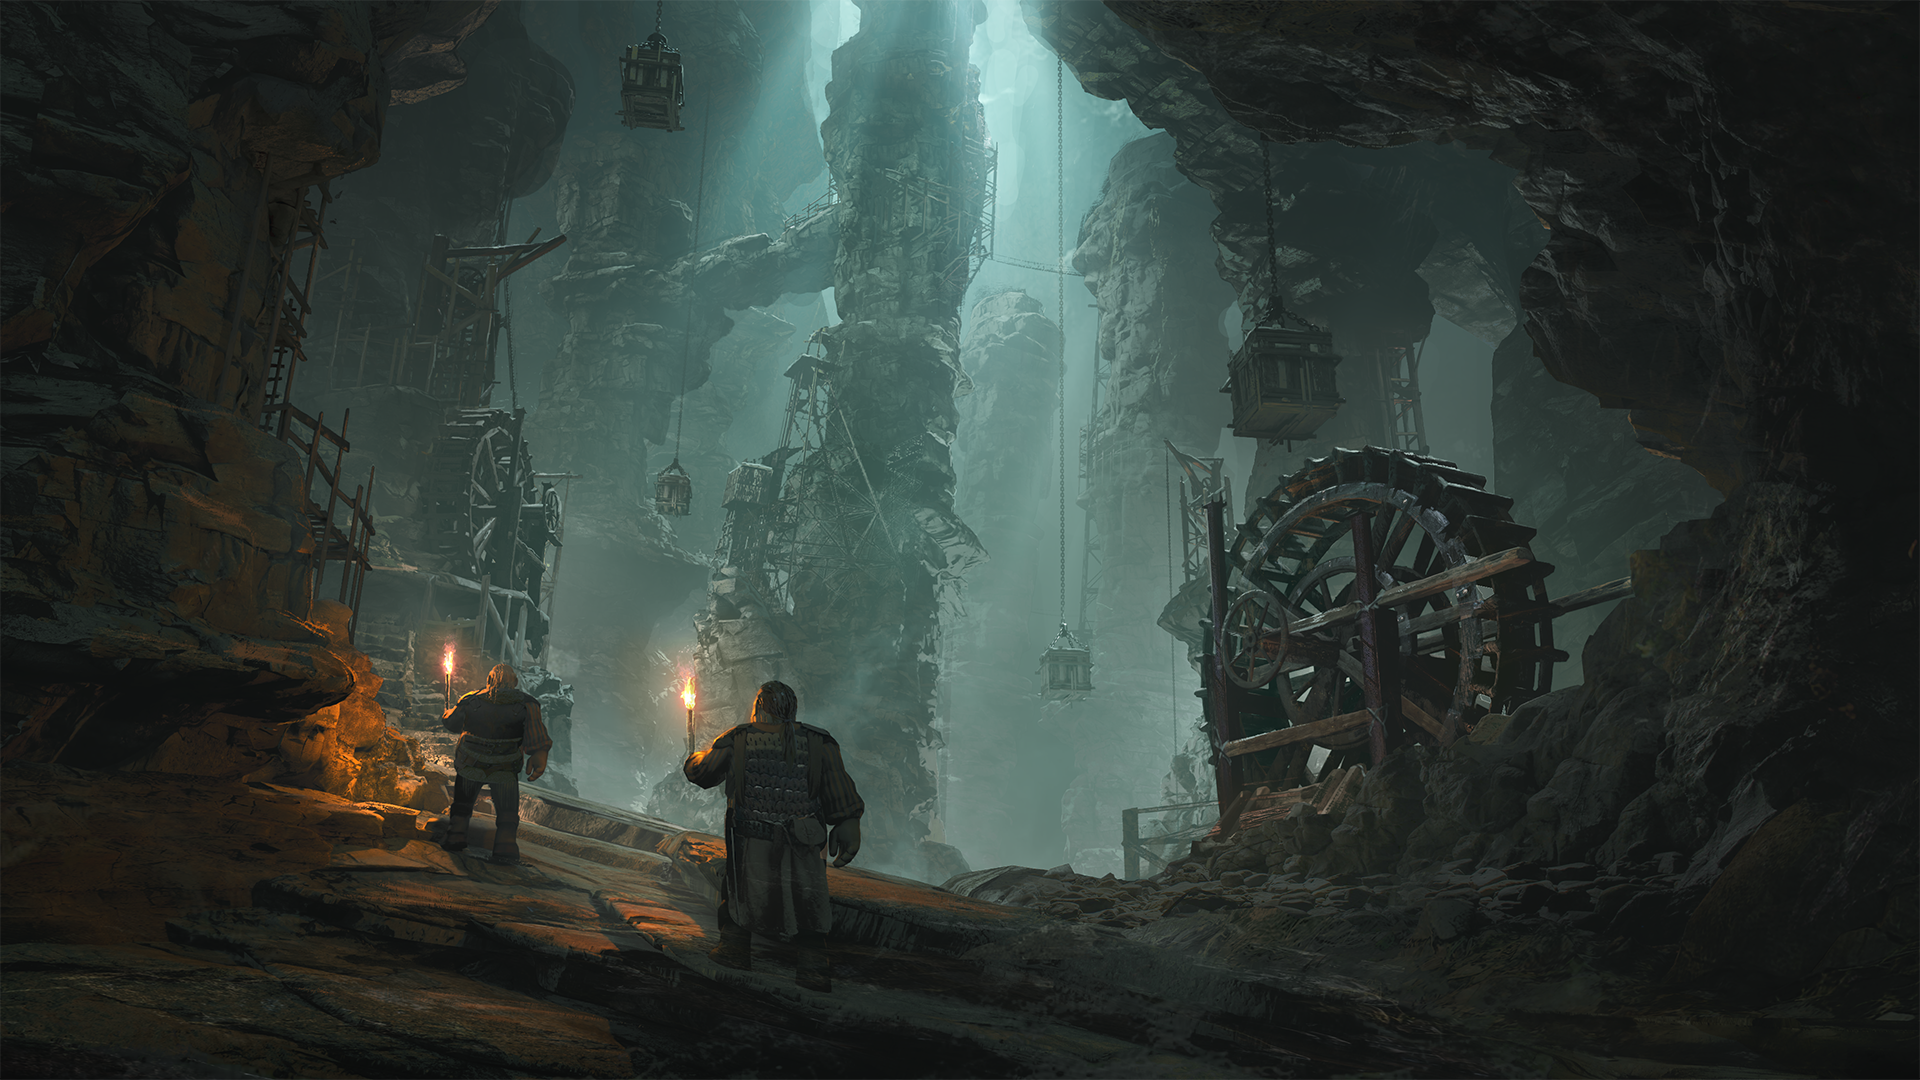 Image for The Lord of the Rings: Return to Moria is a survival-crafting game coming to PC in 2023